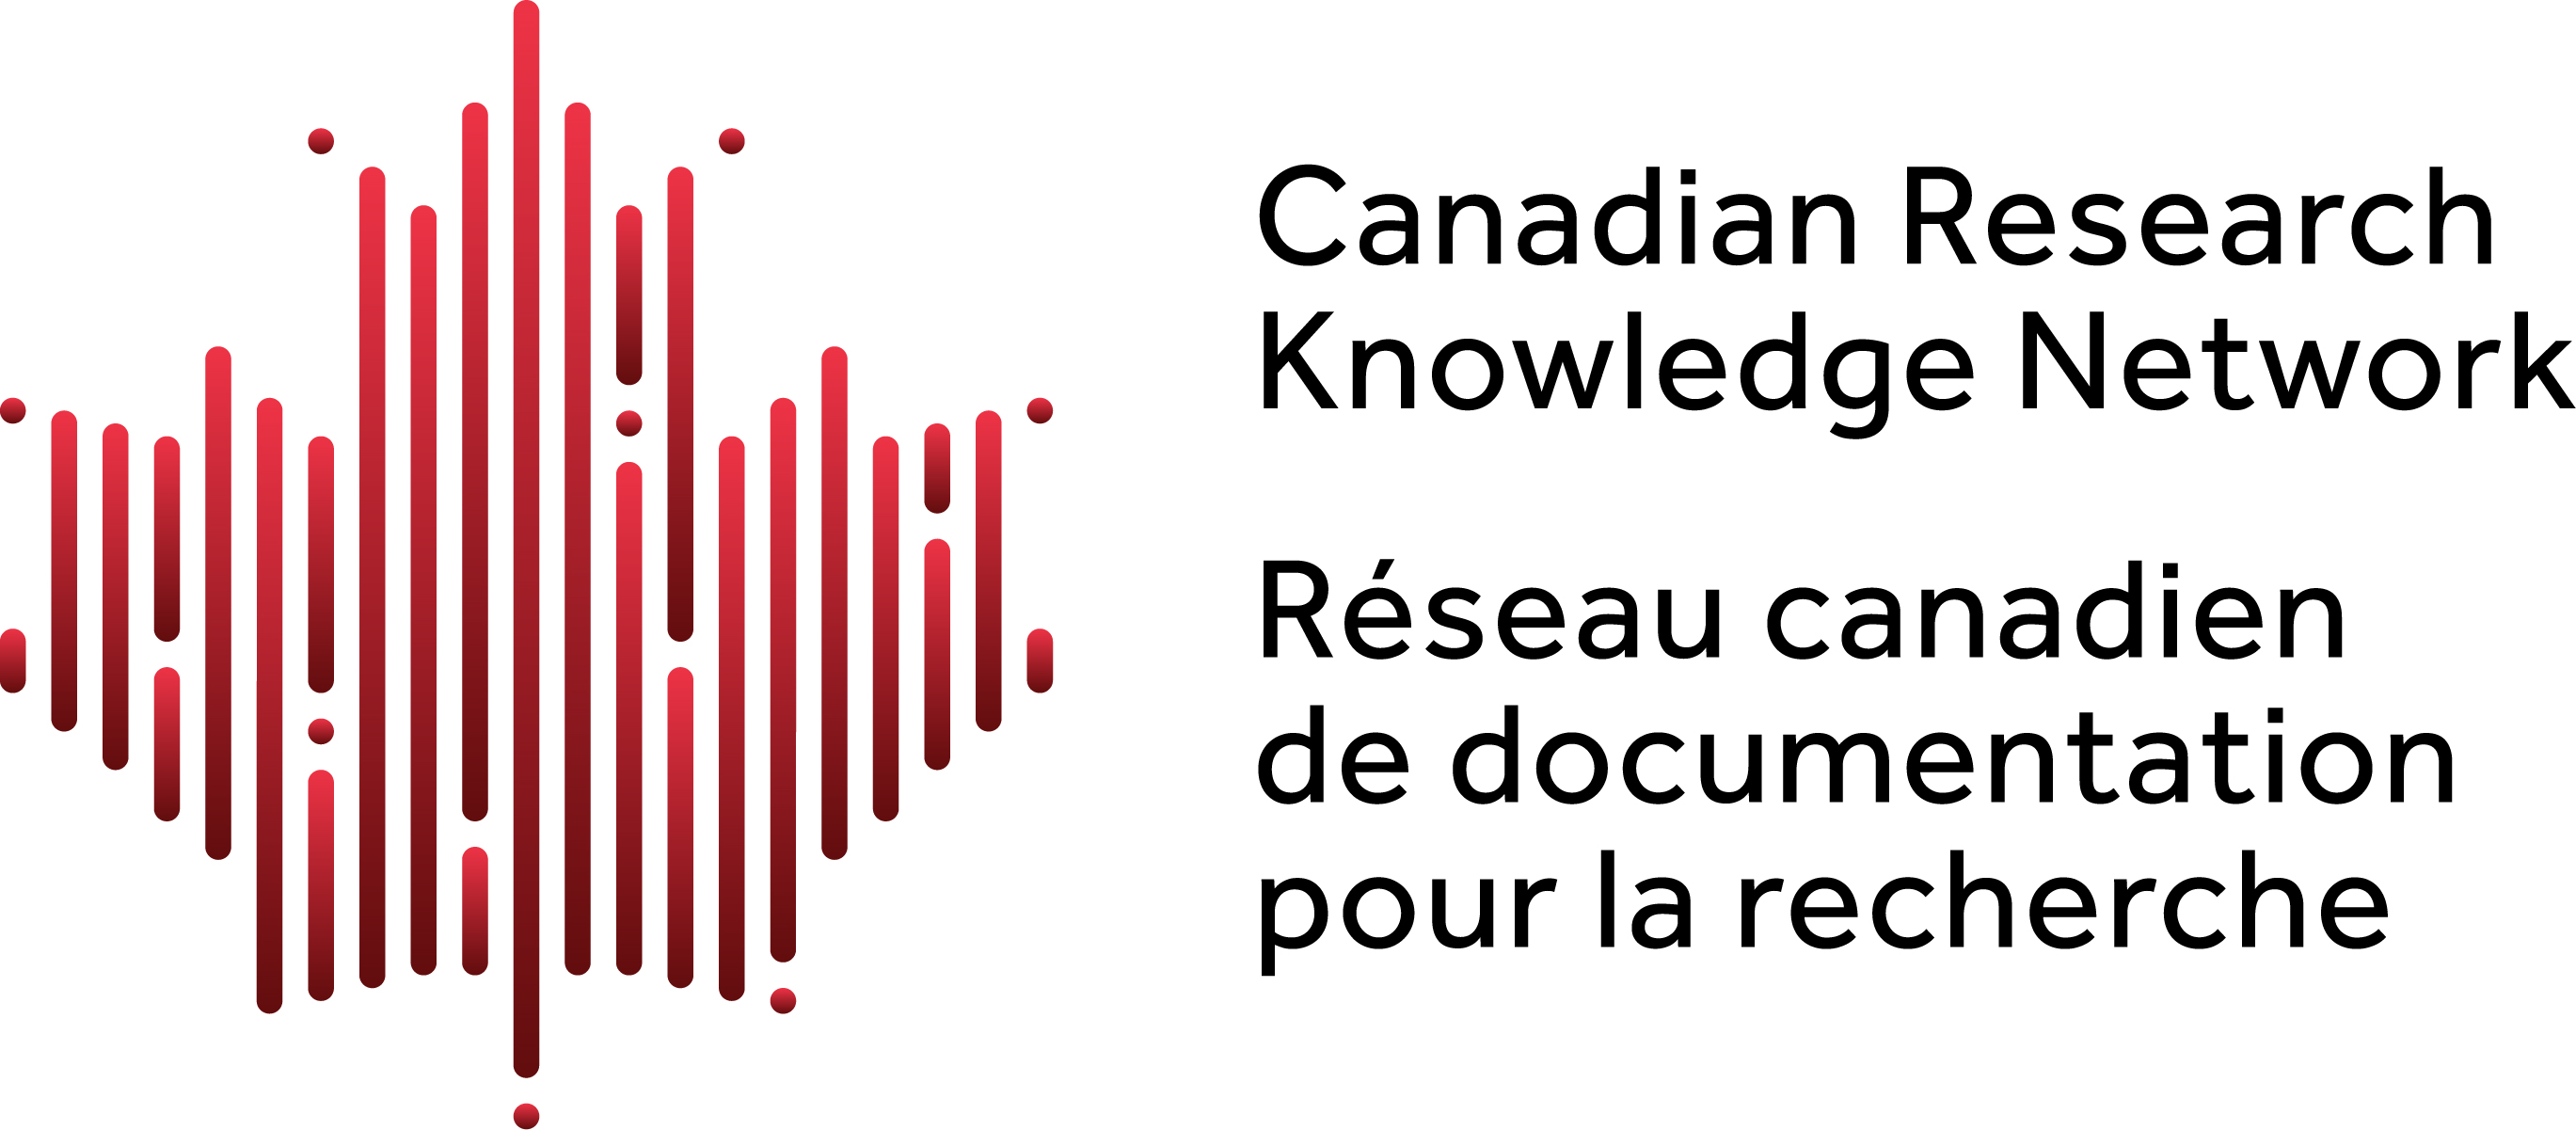 Canadian Research Knowledge Network